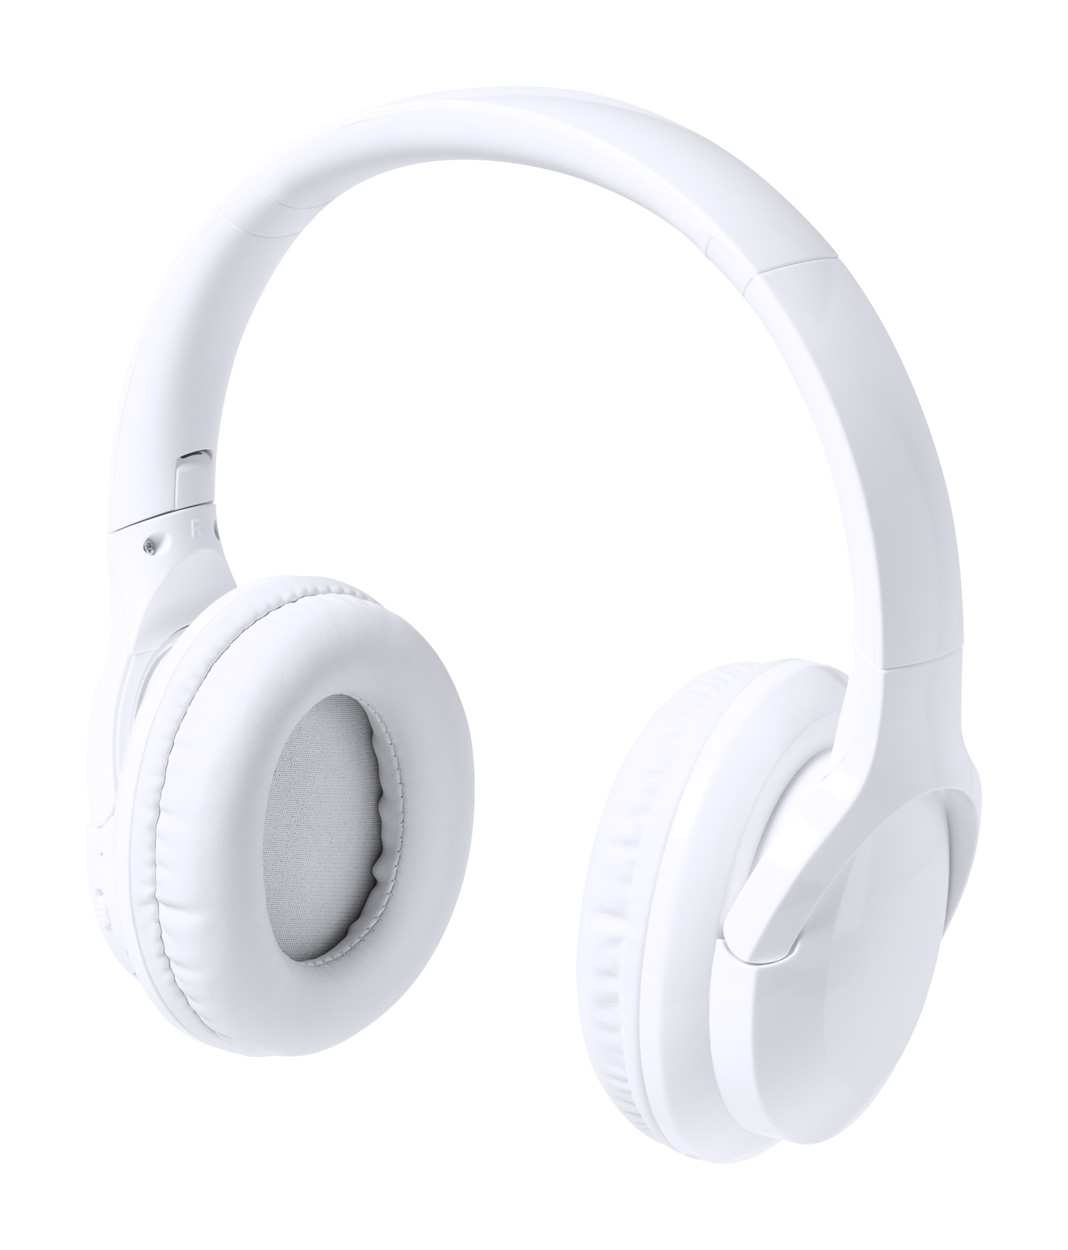 Witums noise canceling headphones - Weiß 